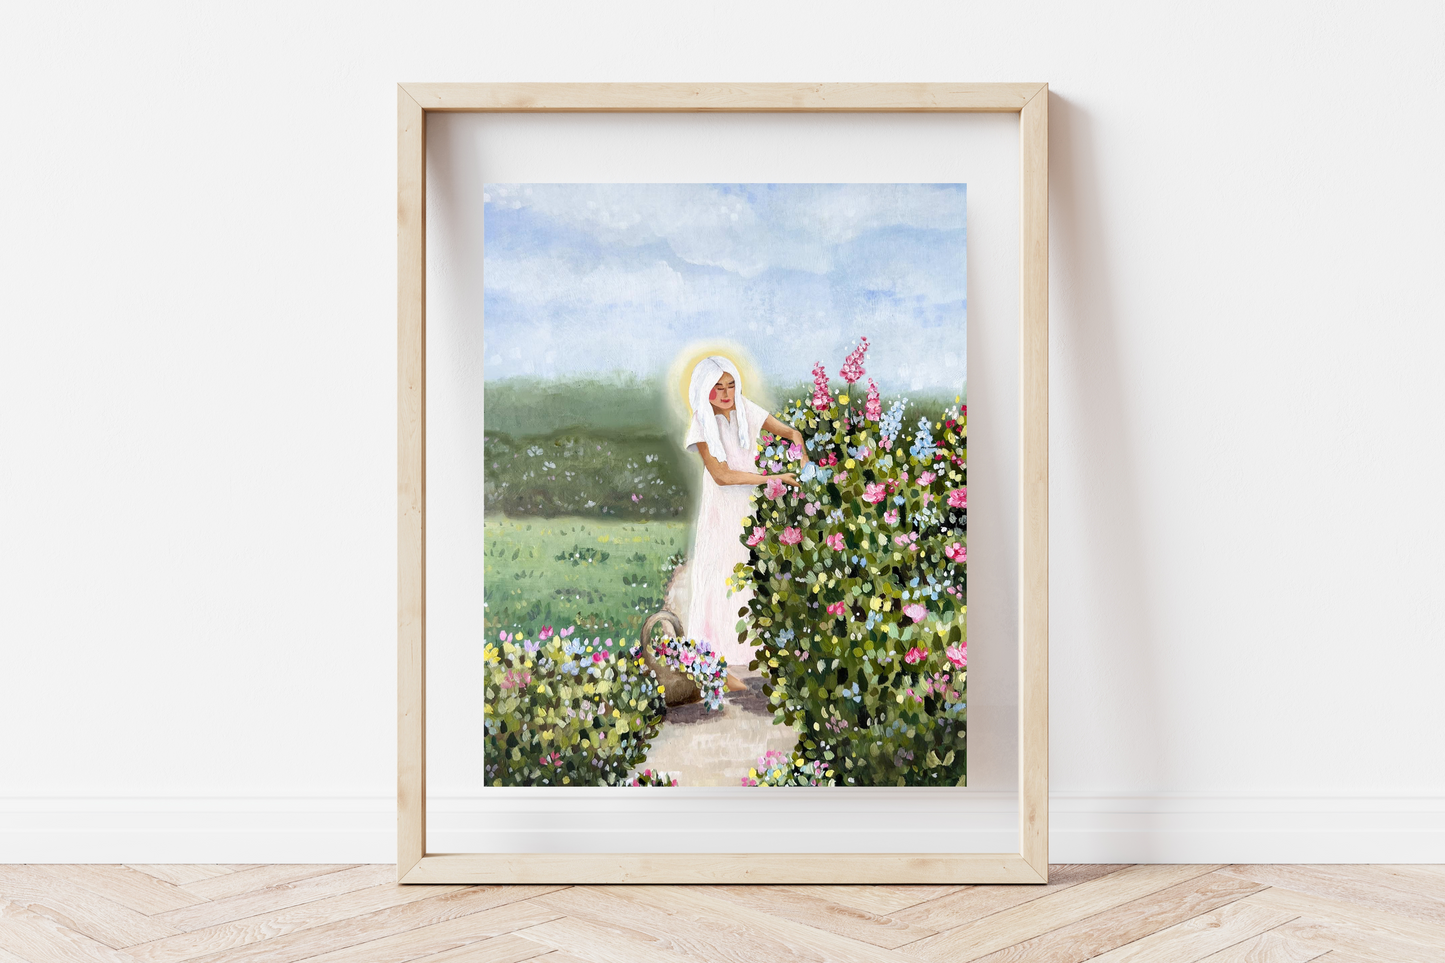 'She Tends to Her Garden' Print